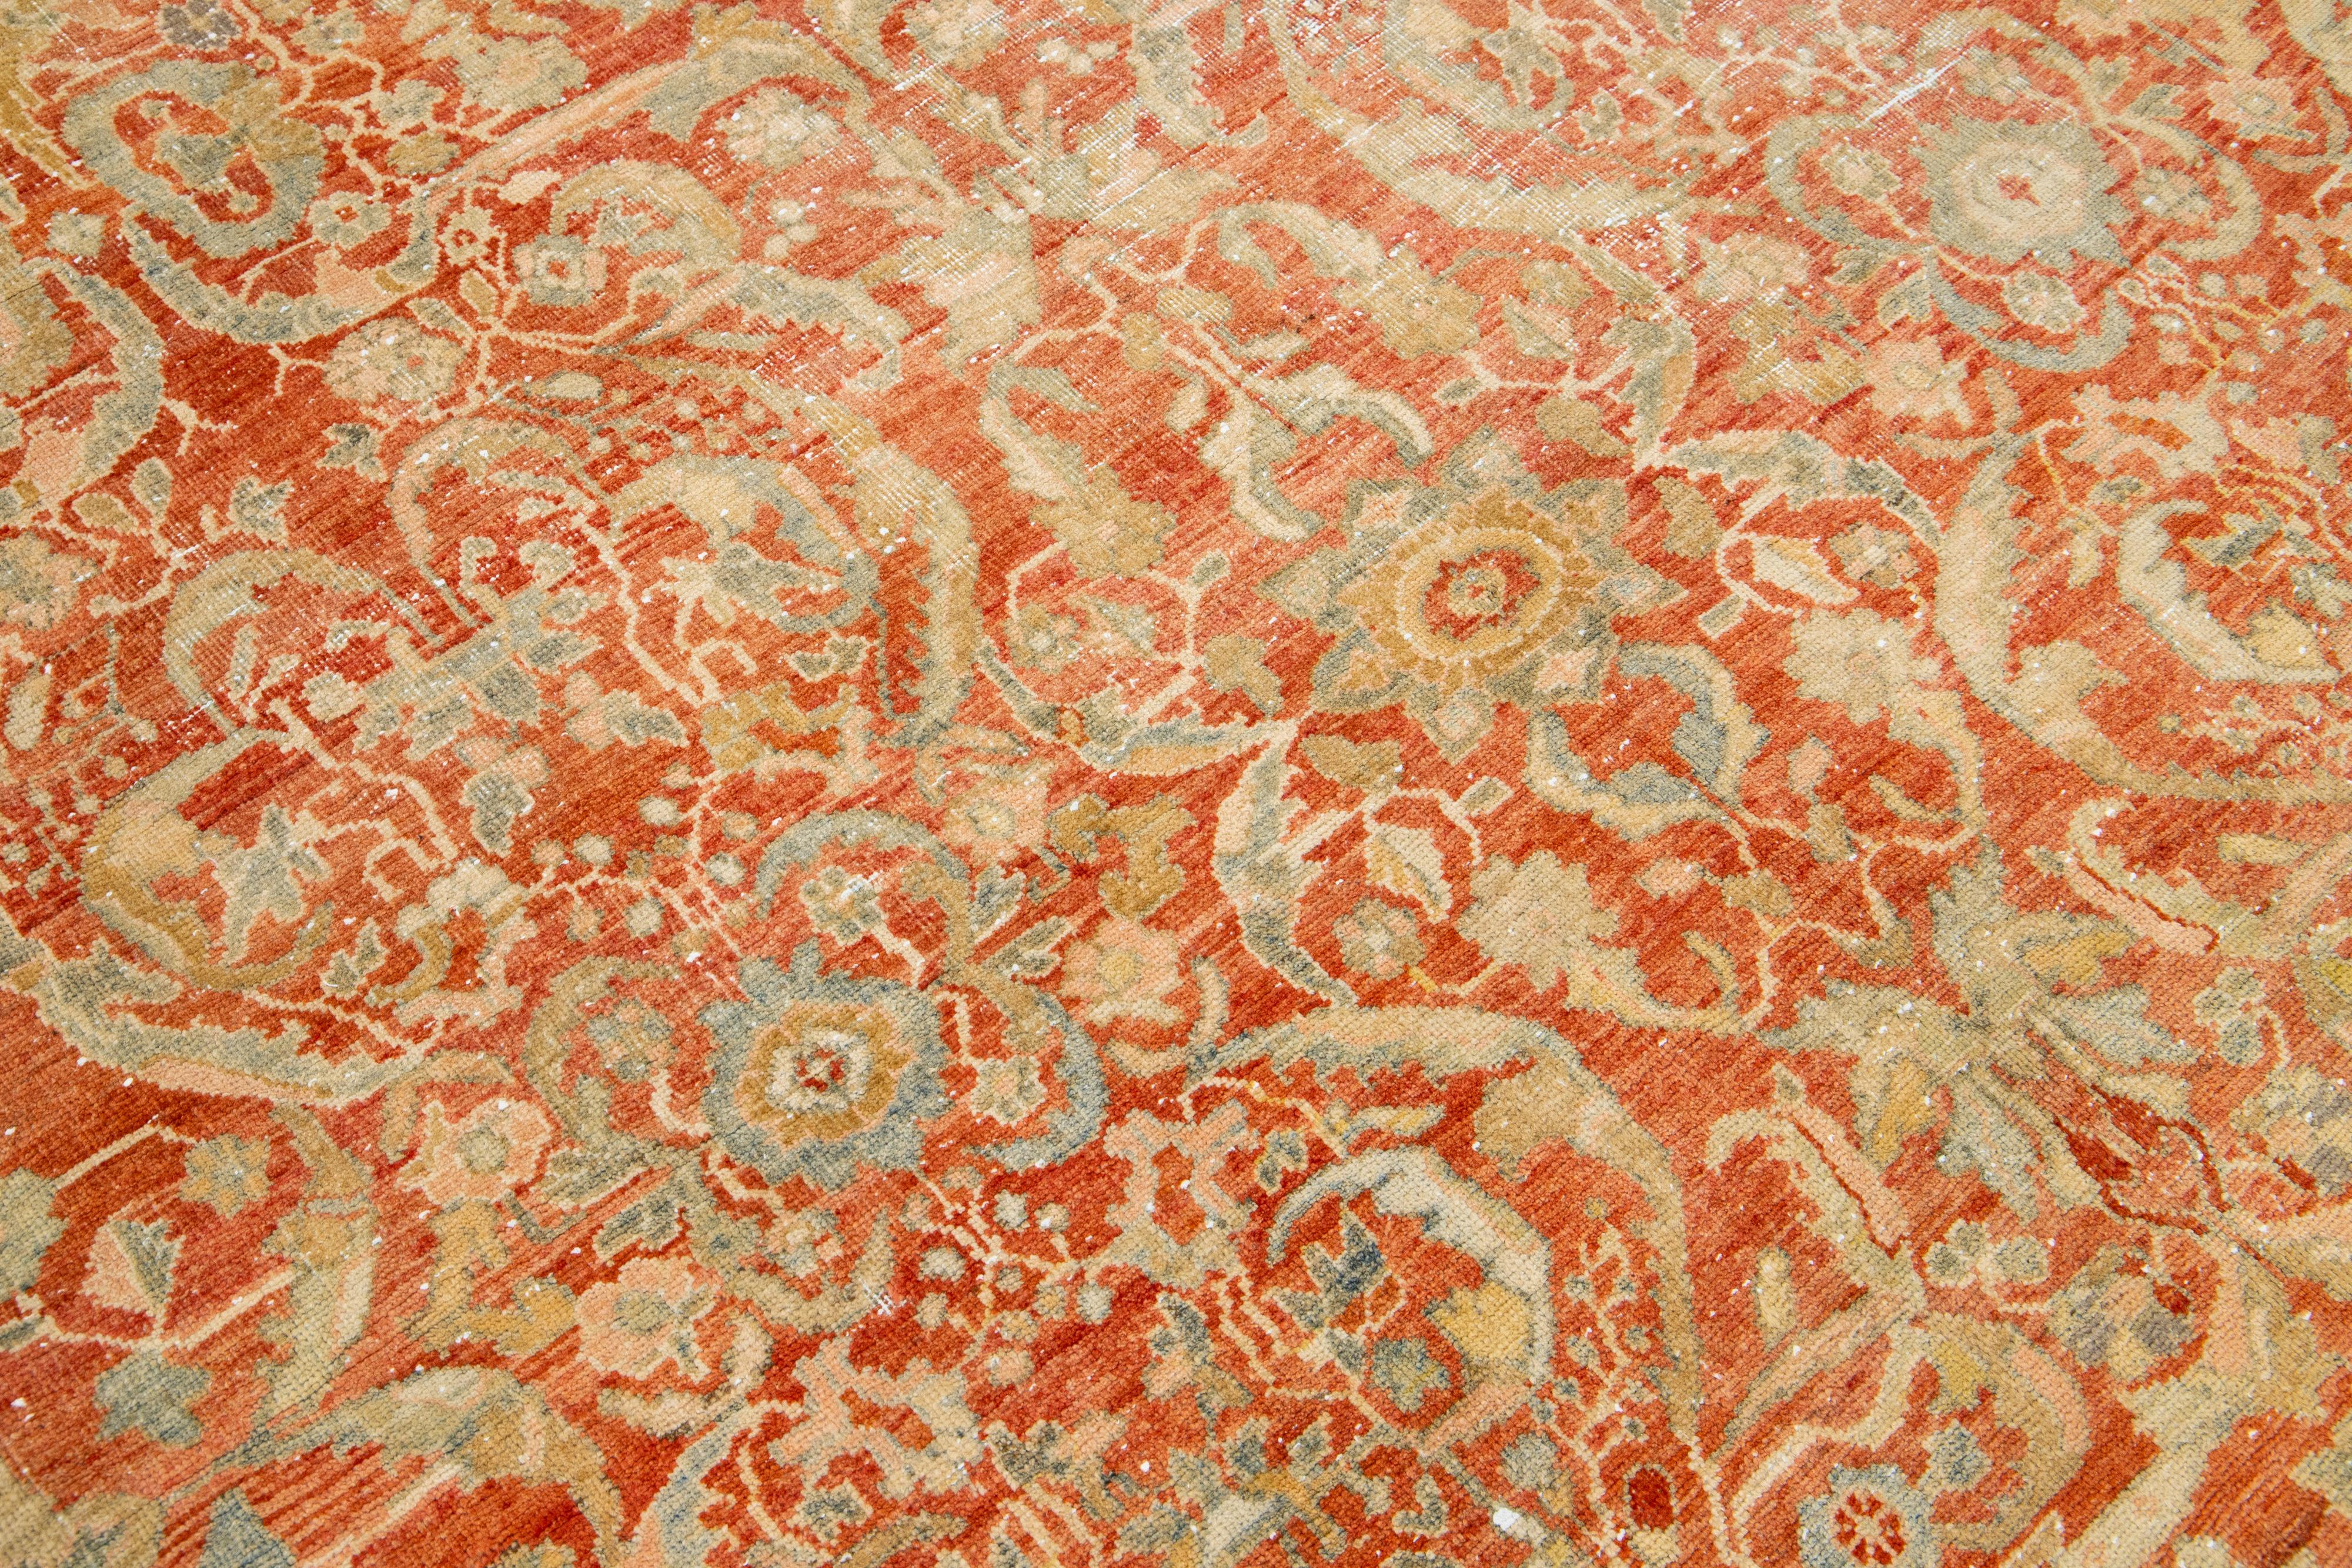 Hand-Knotted 1920s Antique Persian Heriz Wool Rug In Rust With Allover Floral Design  For Sale